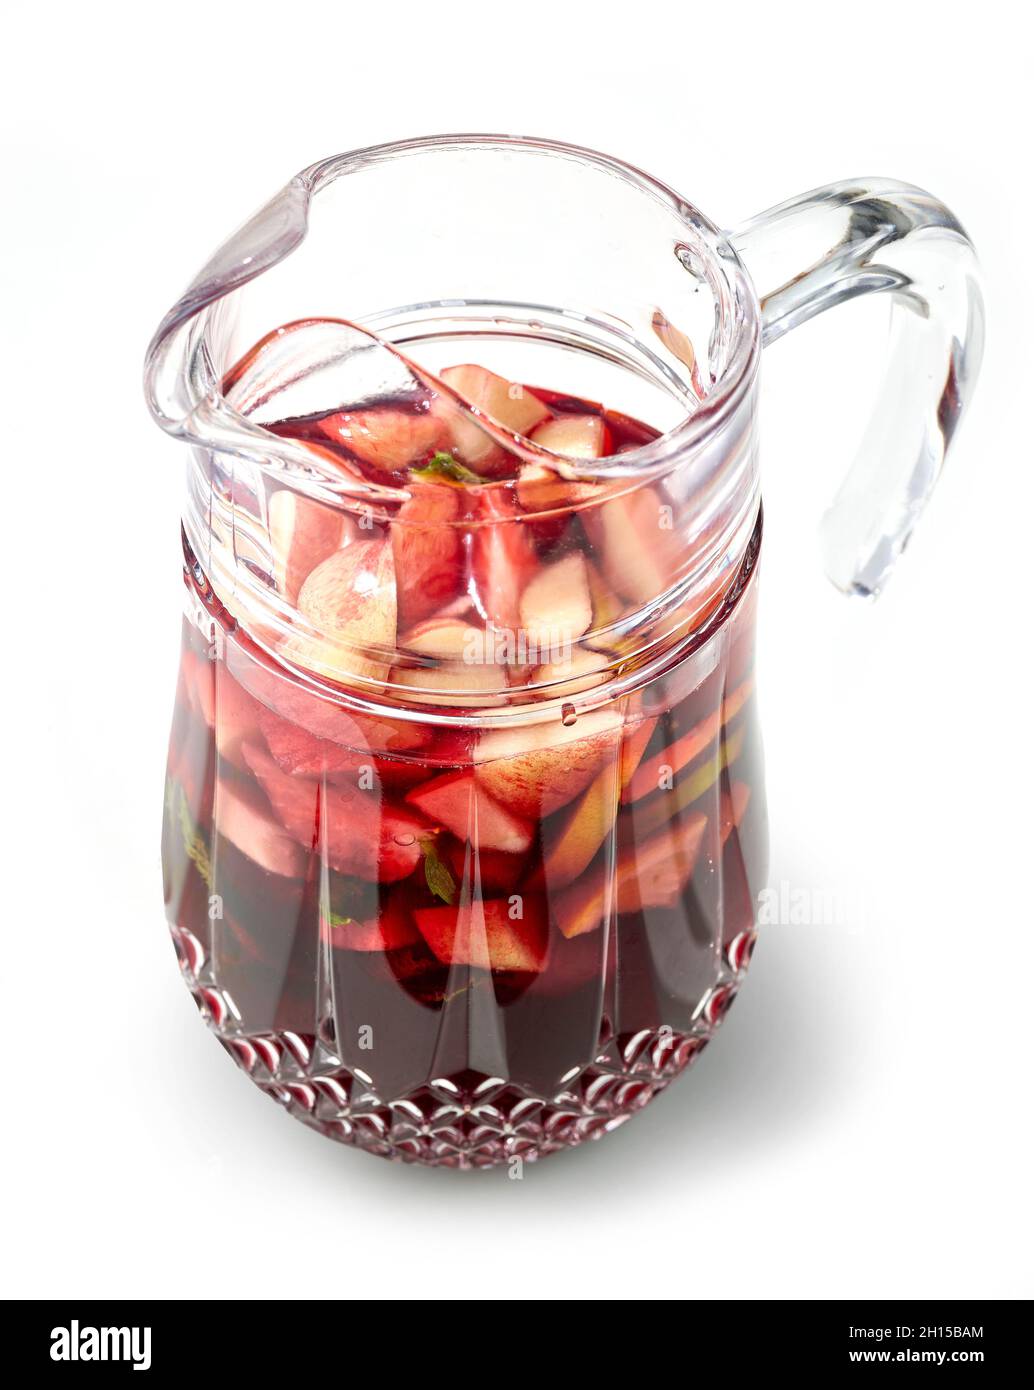 https://c8.alamy.com/comp/2H15BAM/jug-of-red-sangria-isolated-on-white-background-top-view-2H15BAM.jpg